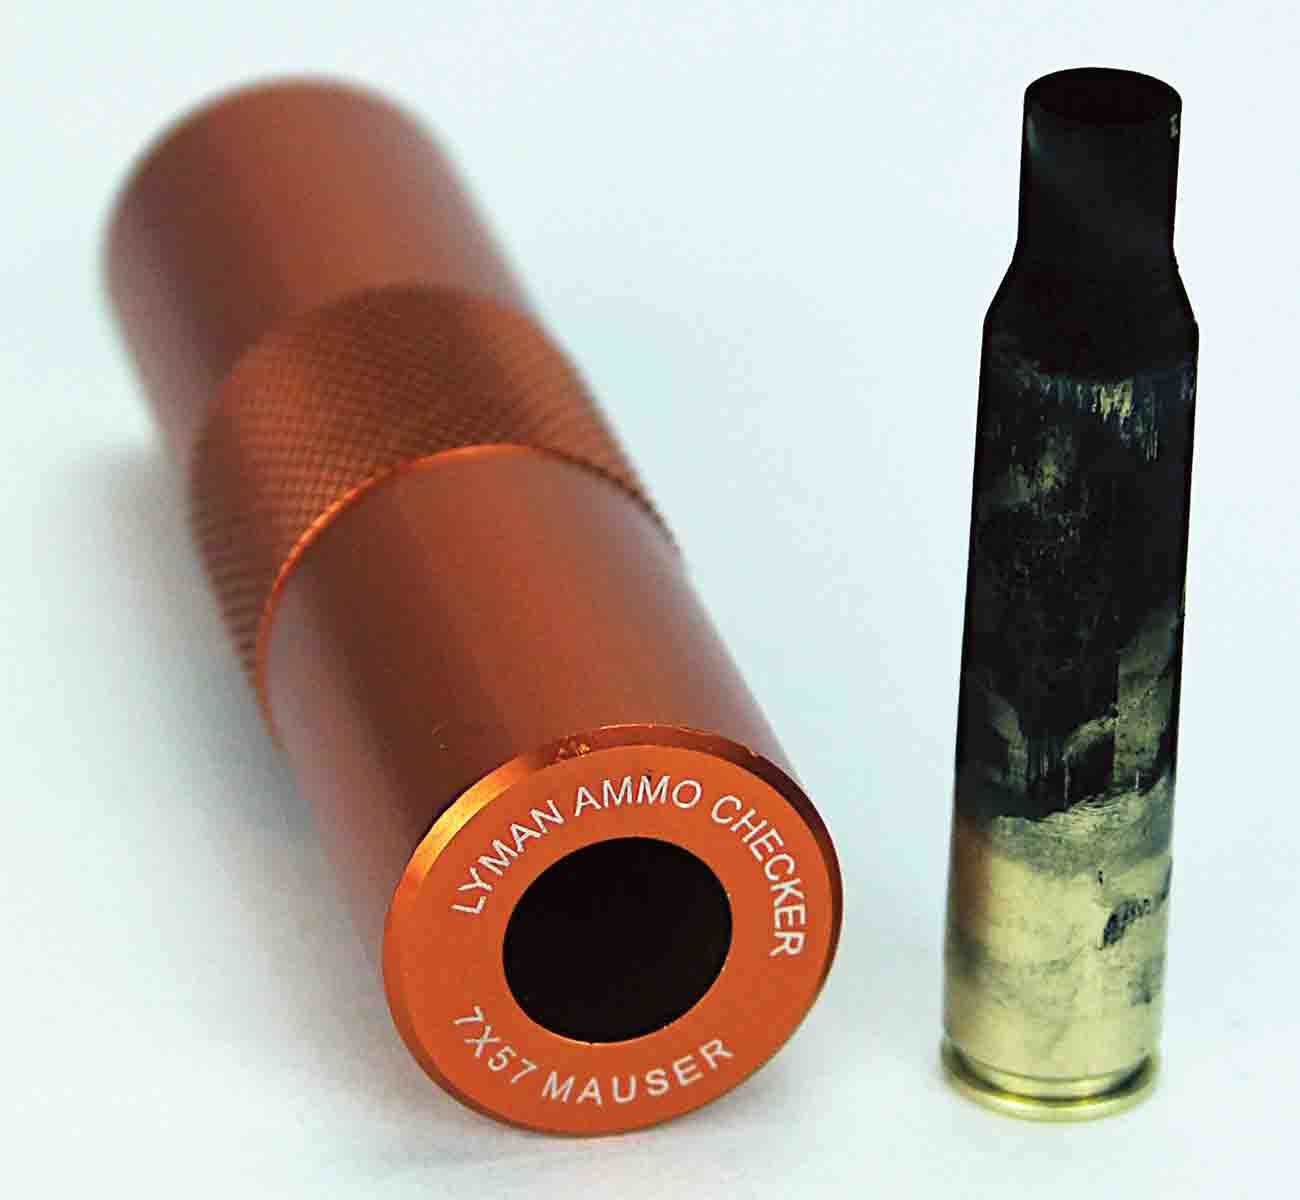 This case was fired with a 60 percent load and neck resized. Shooting it and dropping it in the Lyman Ammo Checker showed the over-expanded case walls caused by the oversize chamber prevent the case from fully entering the gauge (the shoulder hasn’t touched the gauge), yet it still chambers in the military rifle.